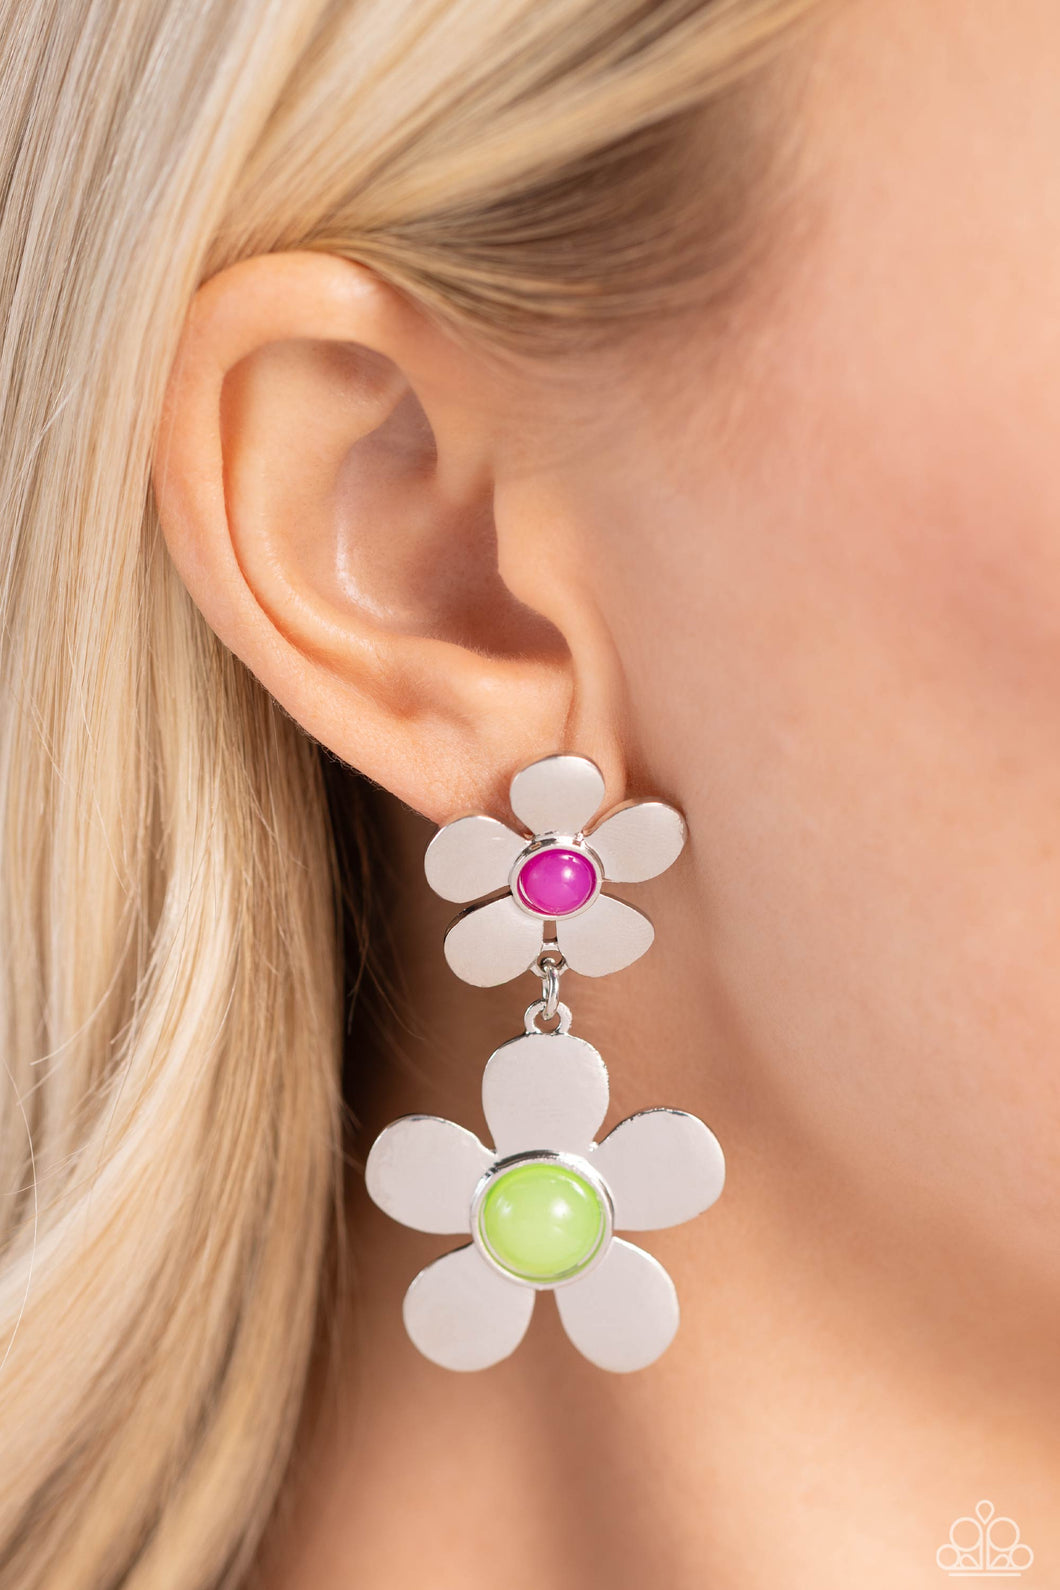 Sleek silver flowers featuring glassy orchid and pale green beaded centers gradually increase in size as they fall from the ear, infusing the sophisticated design with whimsical movement. Earring attaches to a standard post fitting.  Sold as one pair of post earrings.